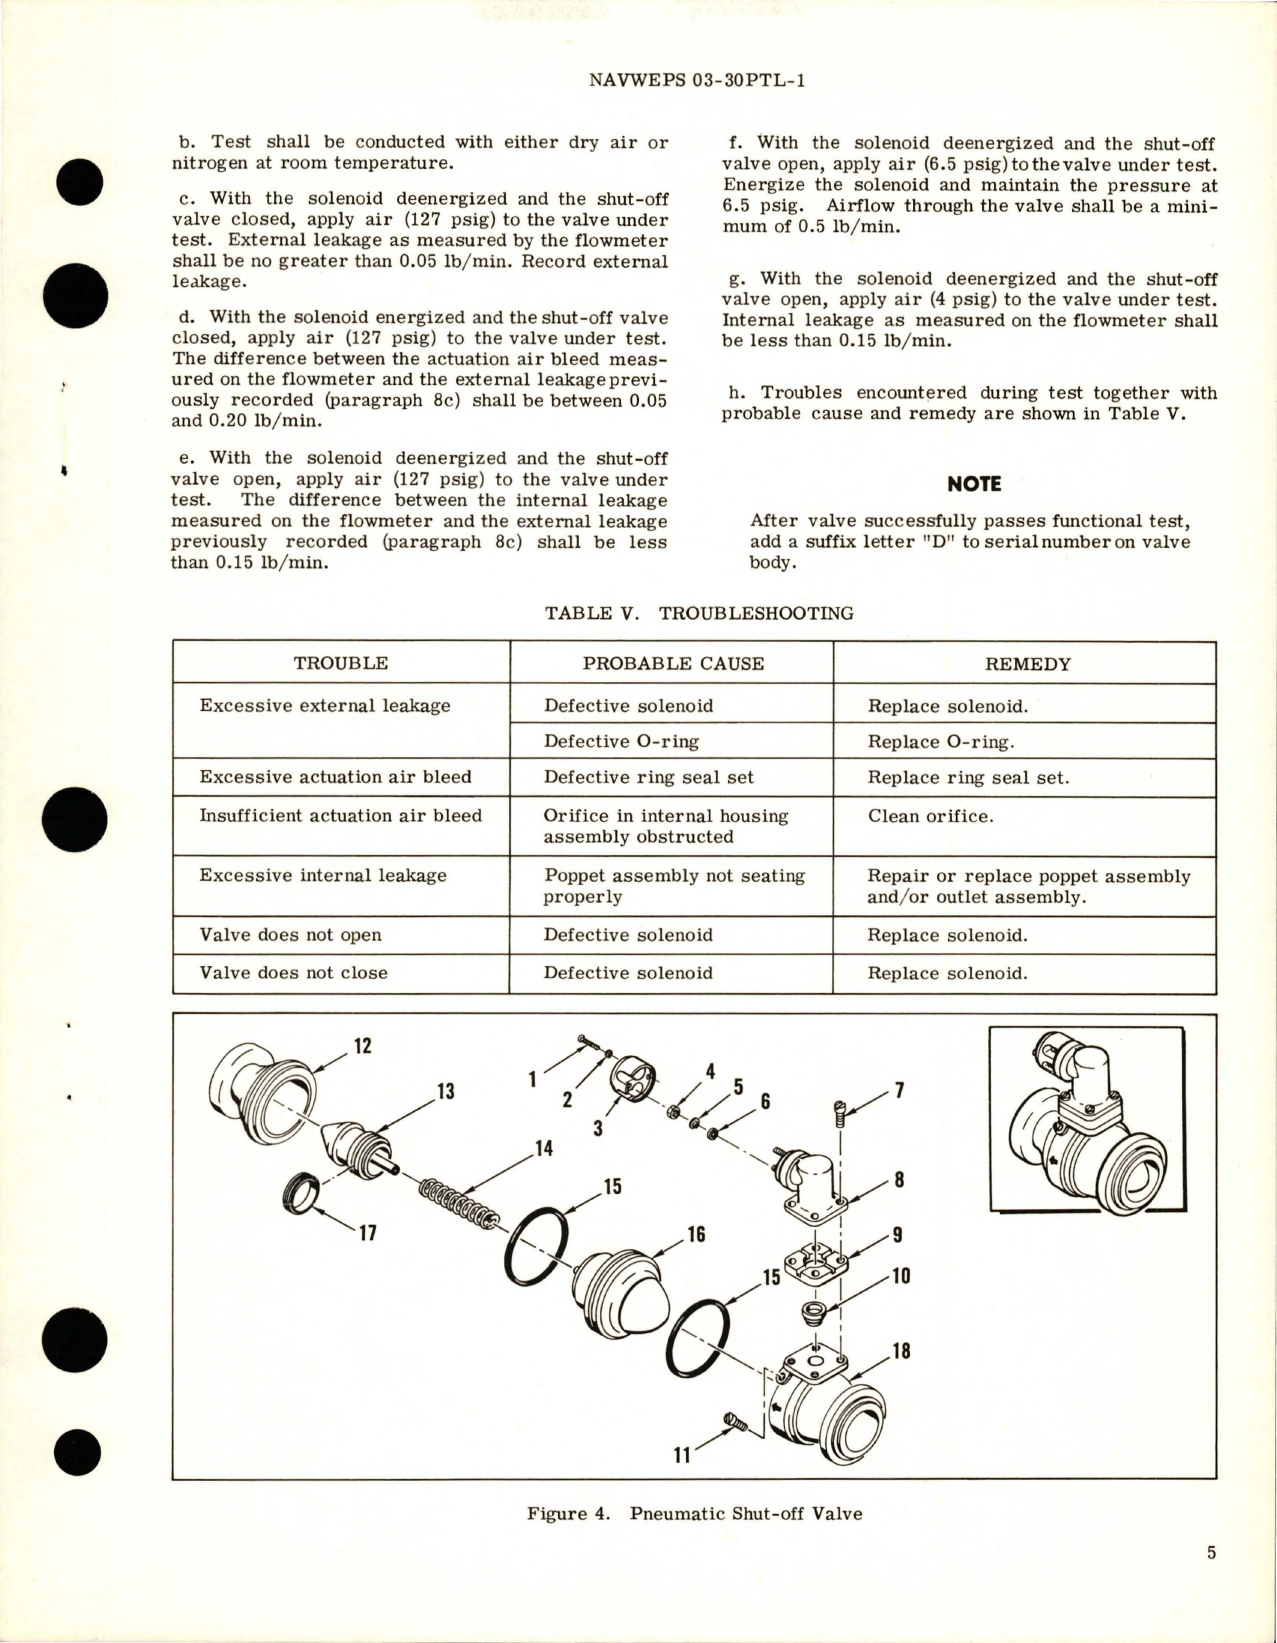 Sample page 5 from AirCorps Library document: Overhaul Instructions with Parts Breakdown for Pneumatic Shut-Off Valve - Part 21011